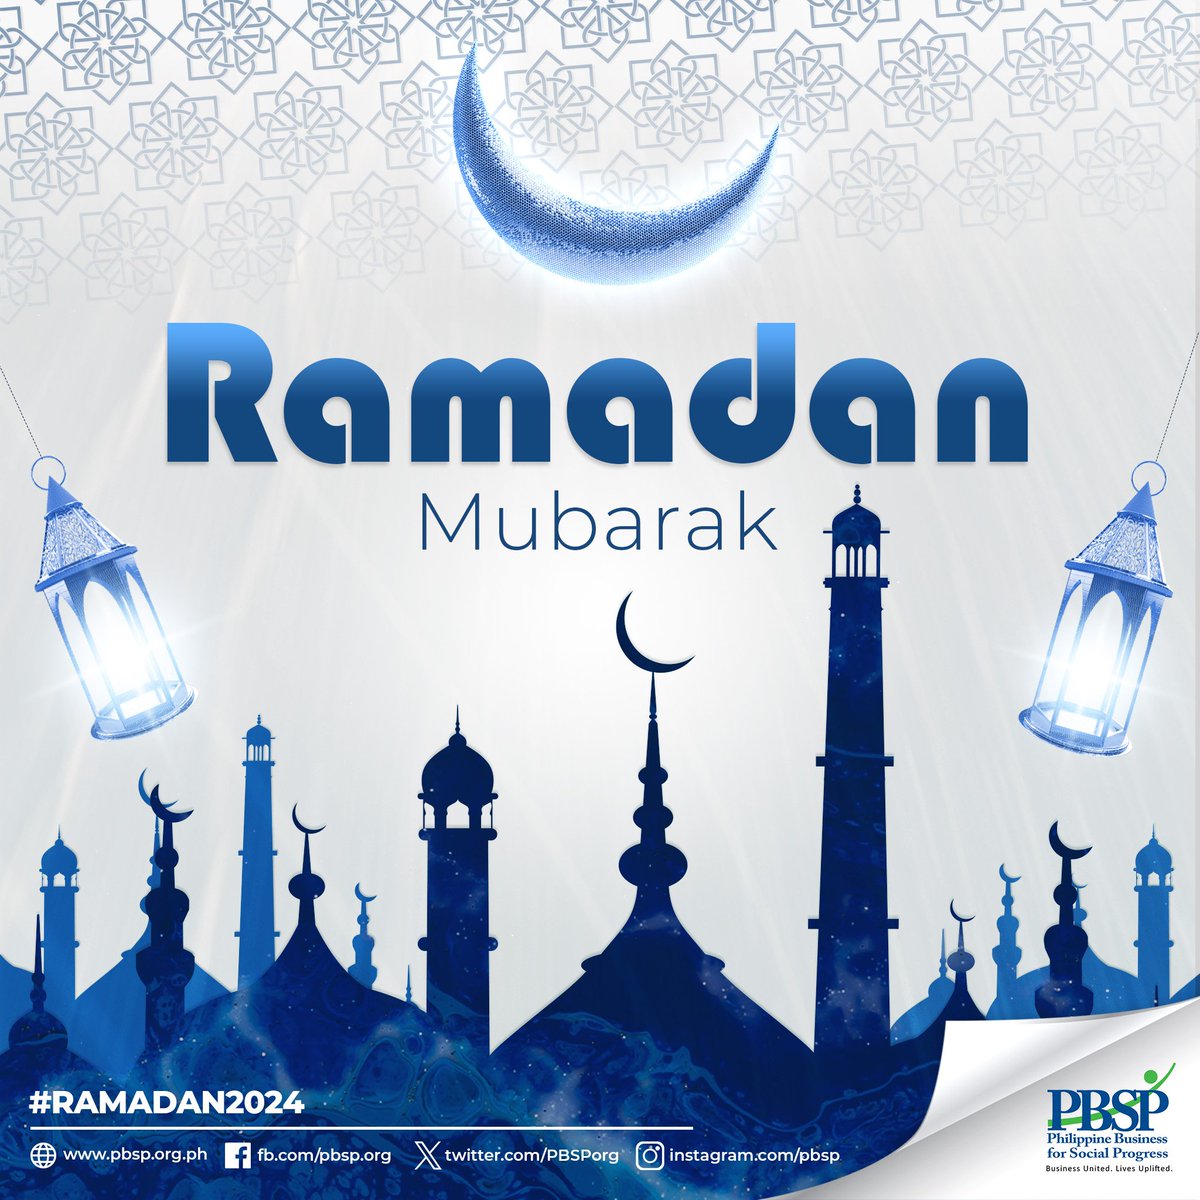 RAMADAN MUBARAK 🌙 🕌 PBSP celebrates the holy month of Ramadan with our Muslim brothers and sisters.